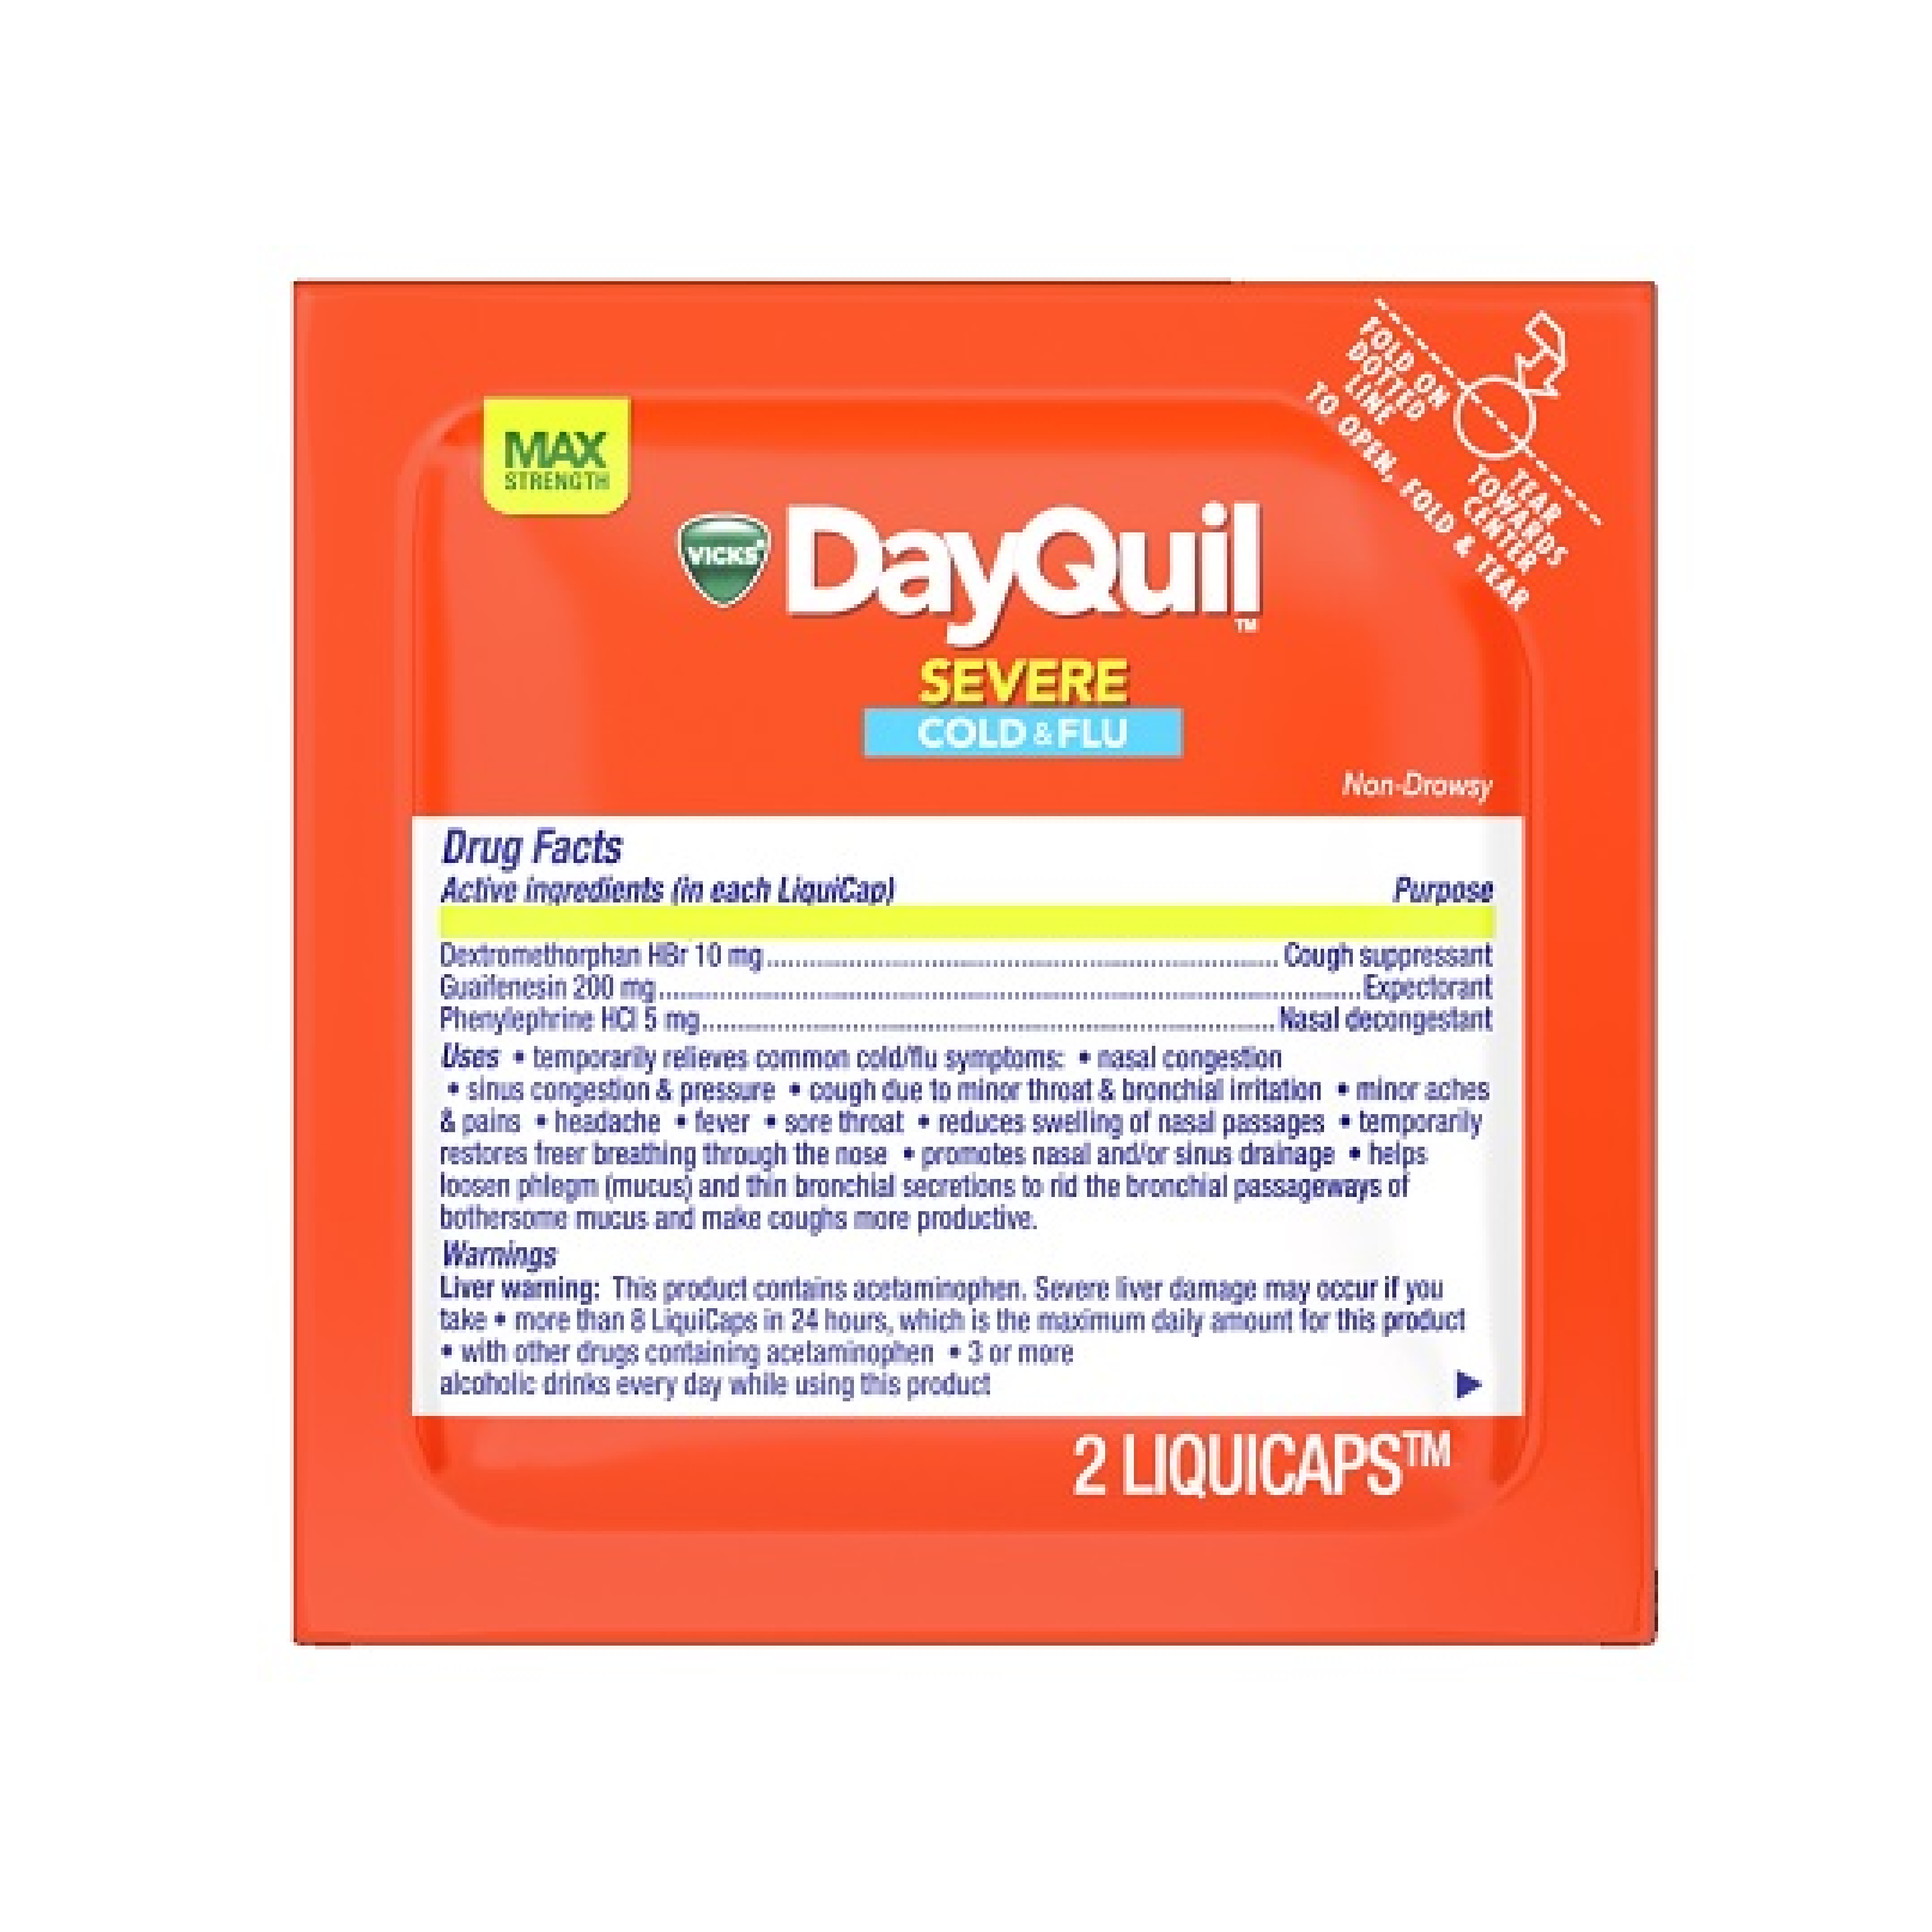 Vicks Dayquil Severe Cold & Flu Liquicaps 2 Count